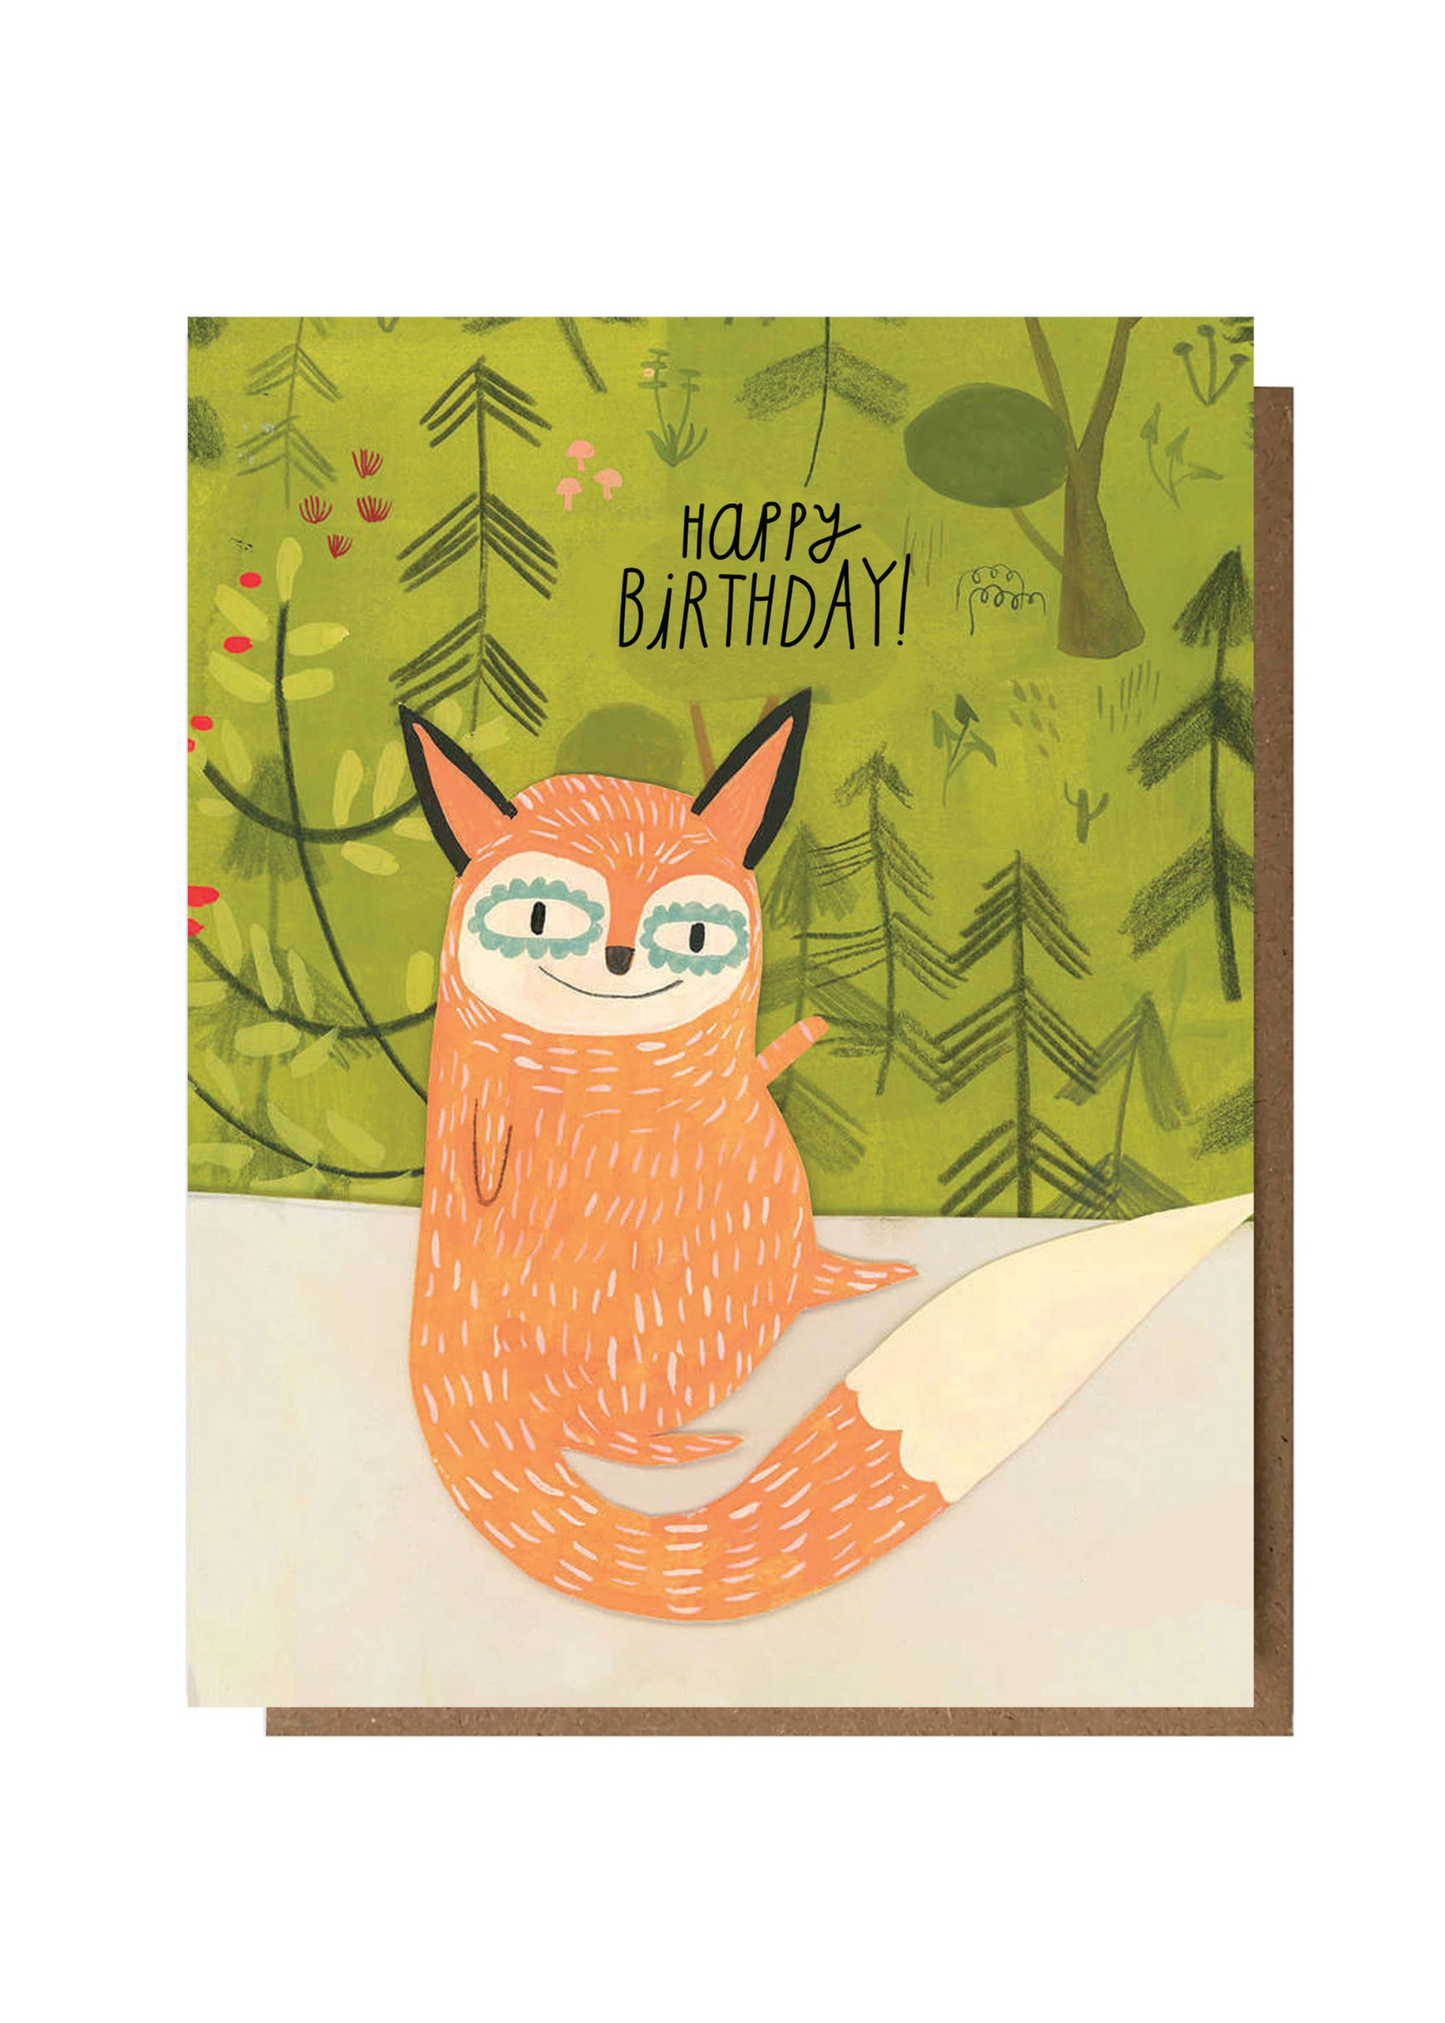 Happy Birthday Forest Ooko Card